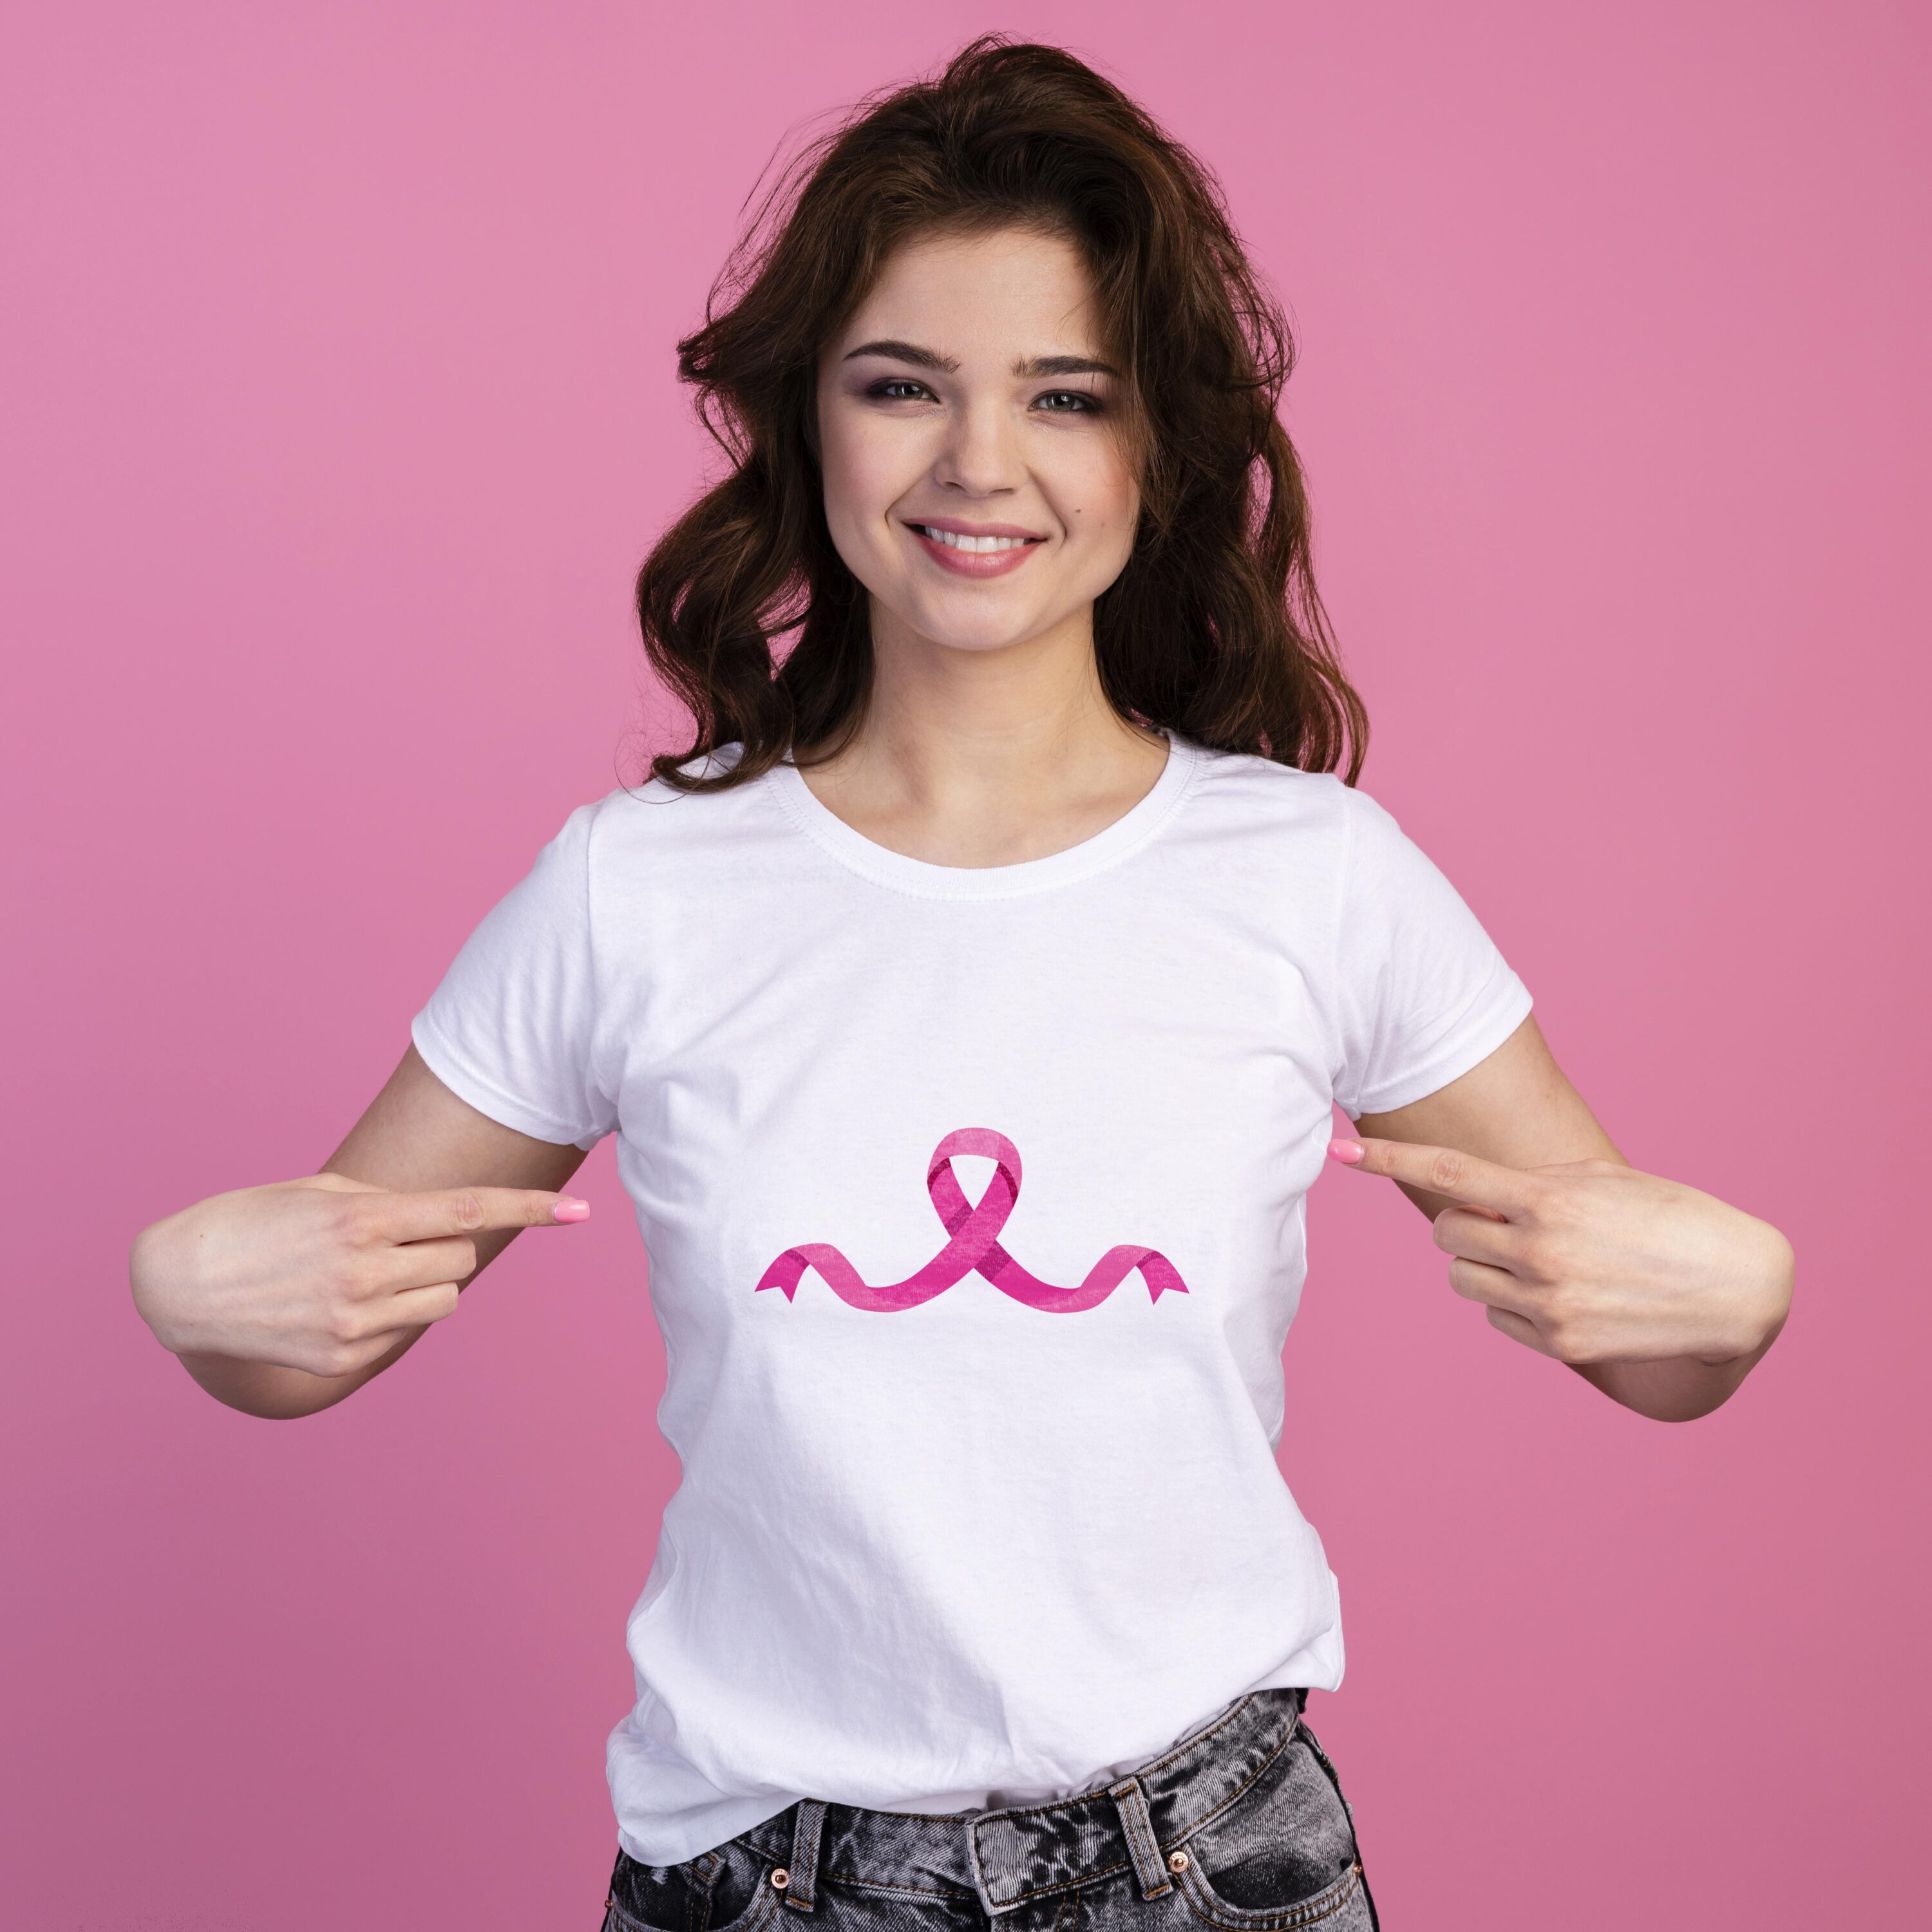 Small curvy breast cancer ribbon on a white t-shirt.